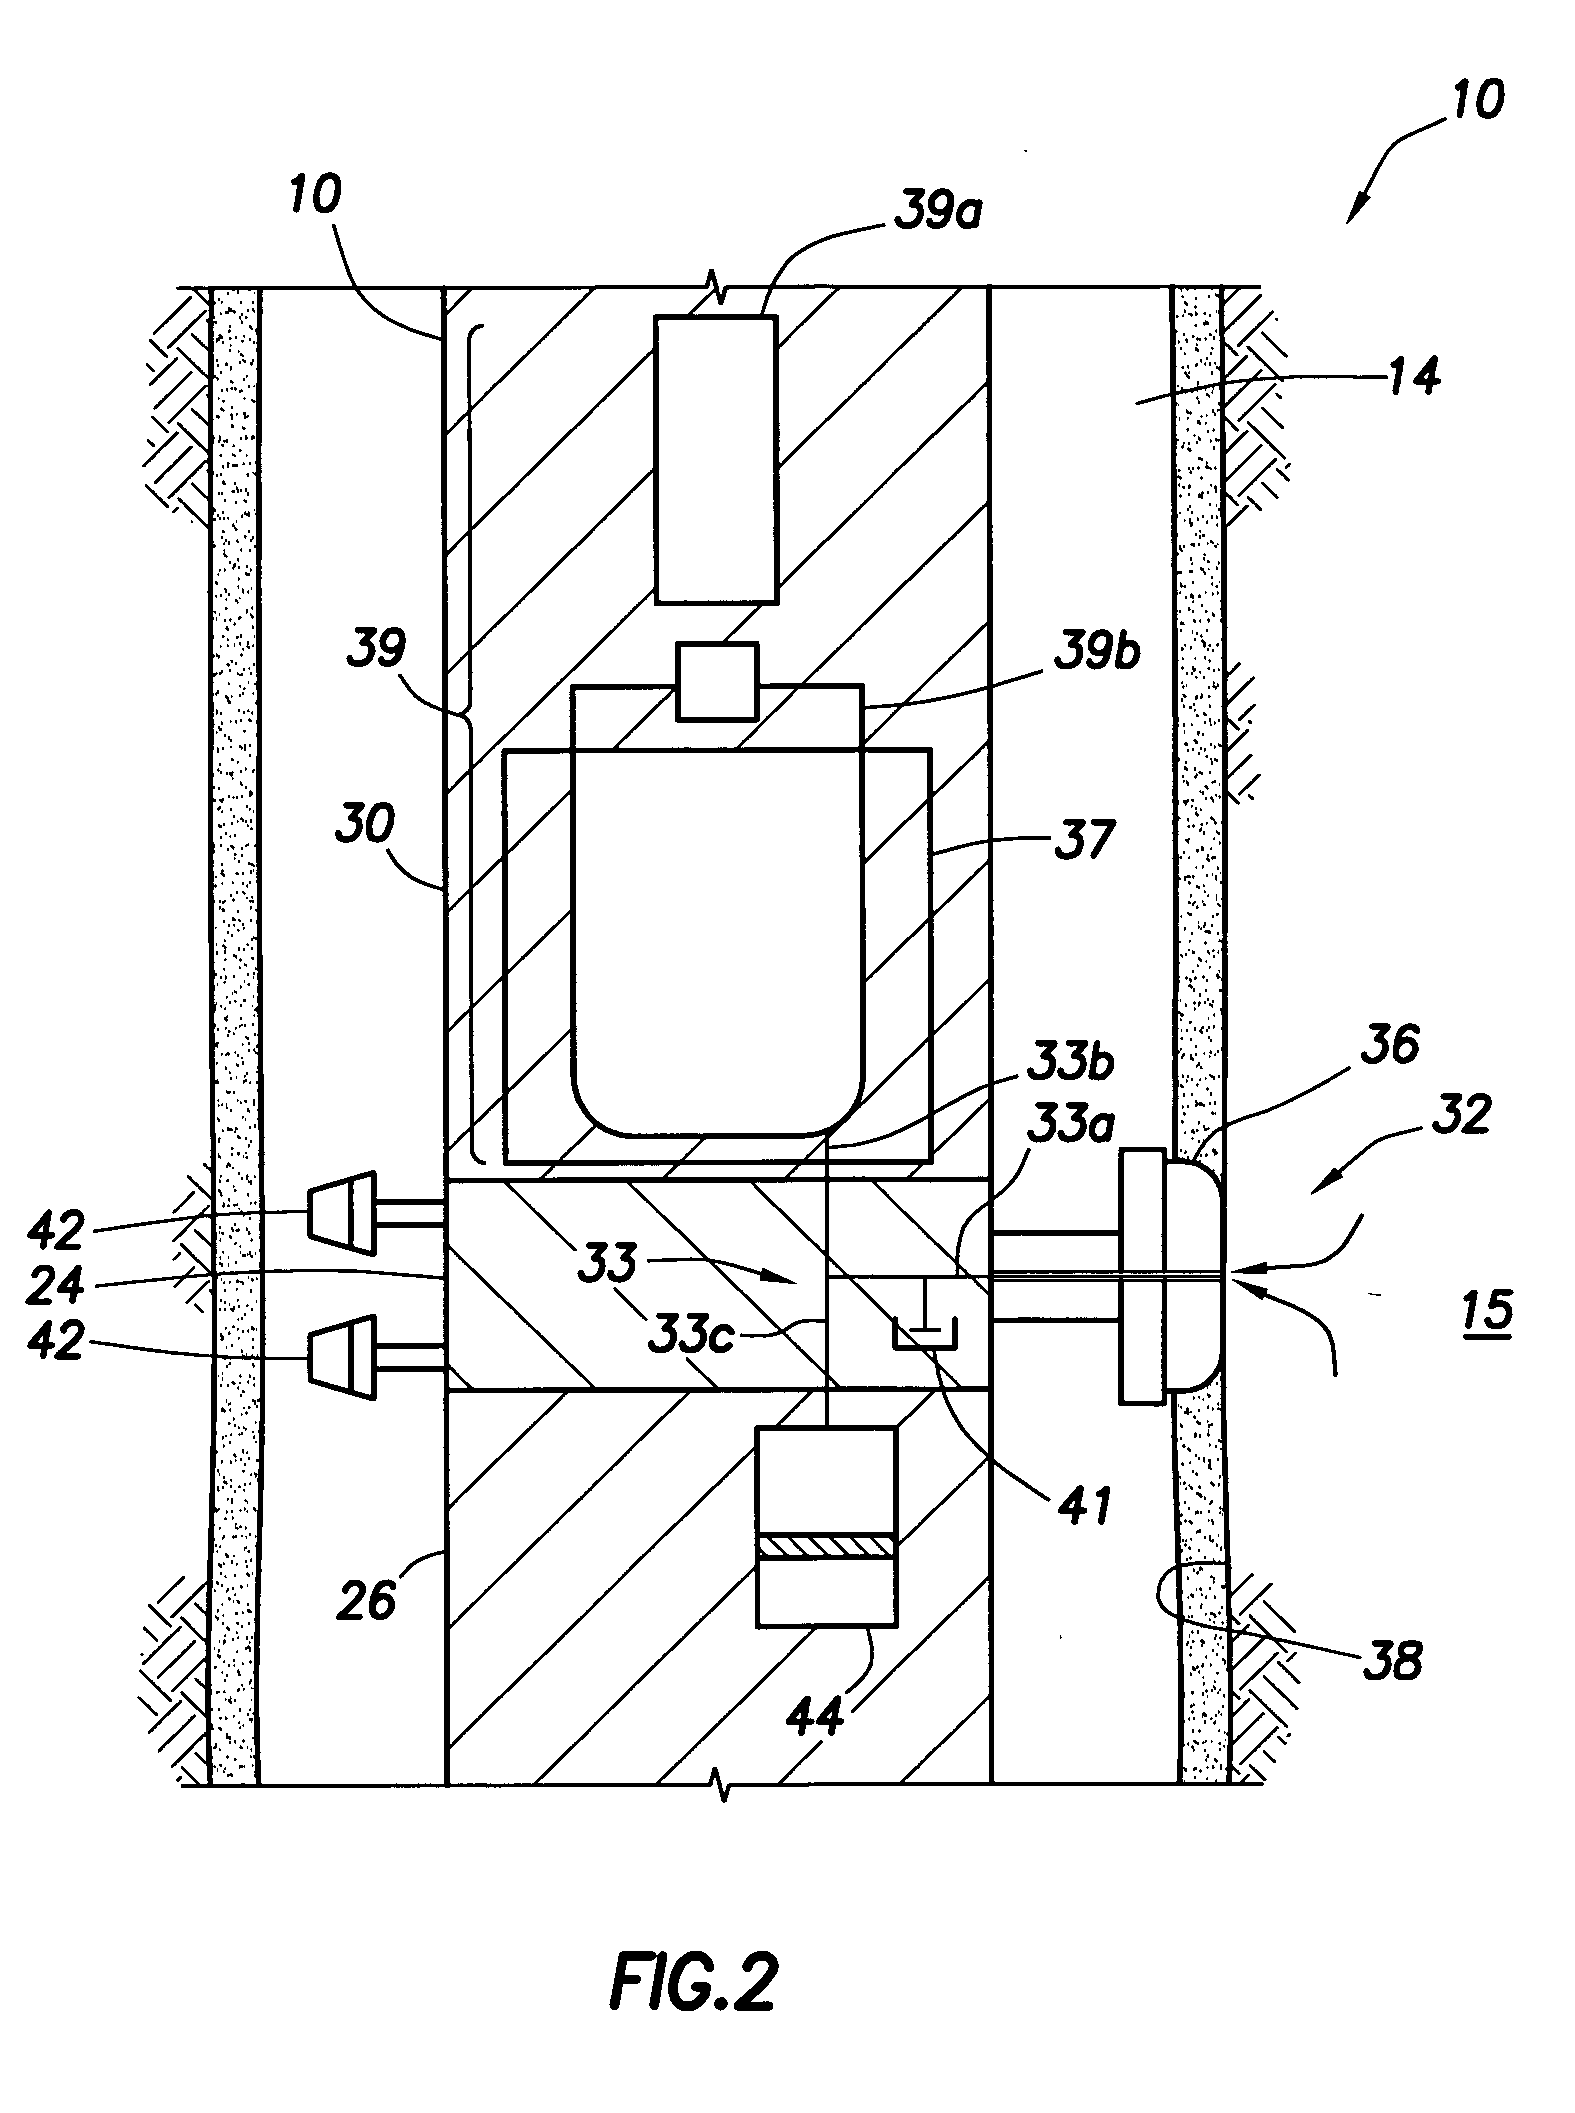 Wellbore formation evaluation system and method